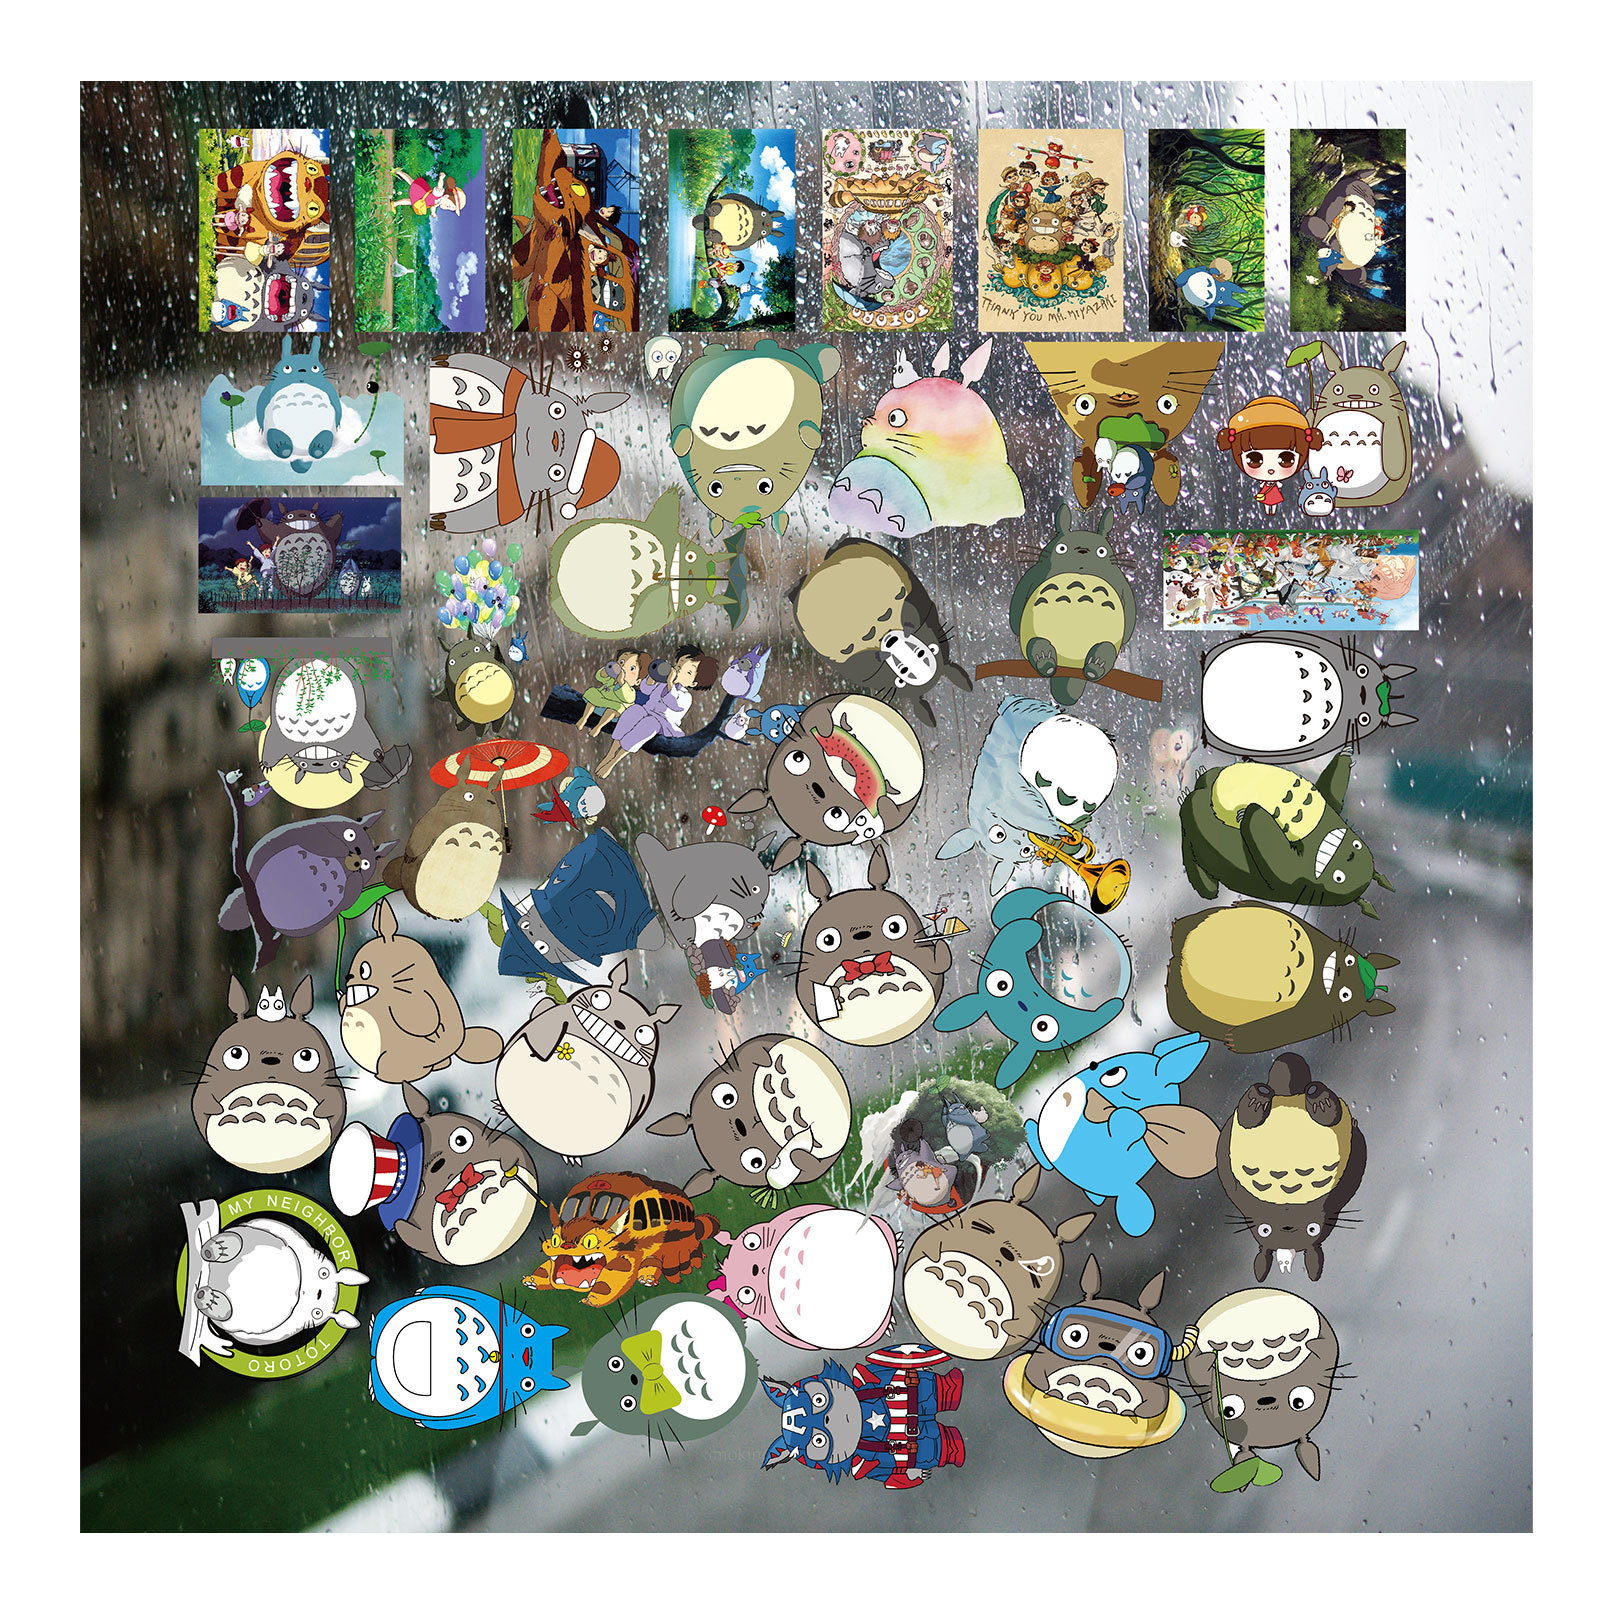 TOTORO anime 3D sticker price for a set of 50pcs